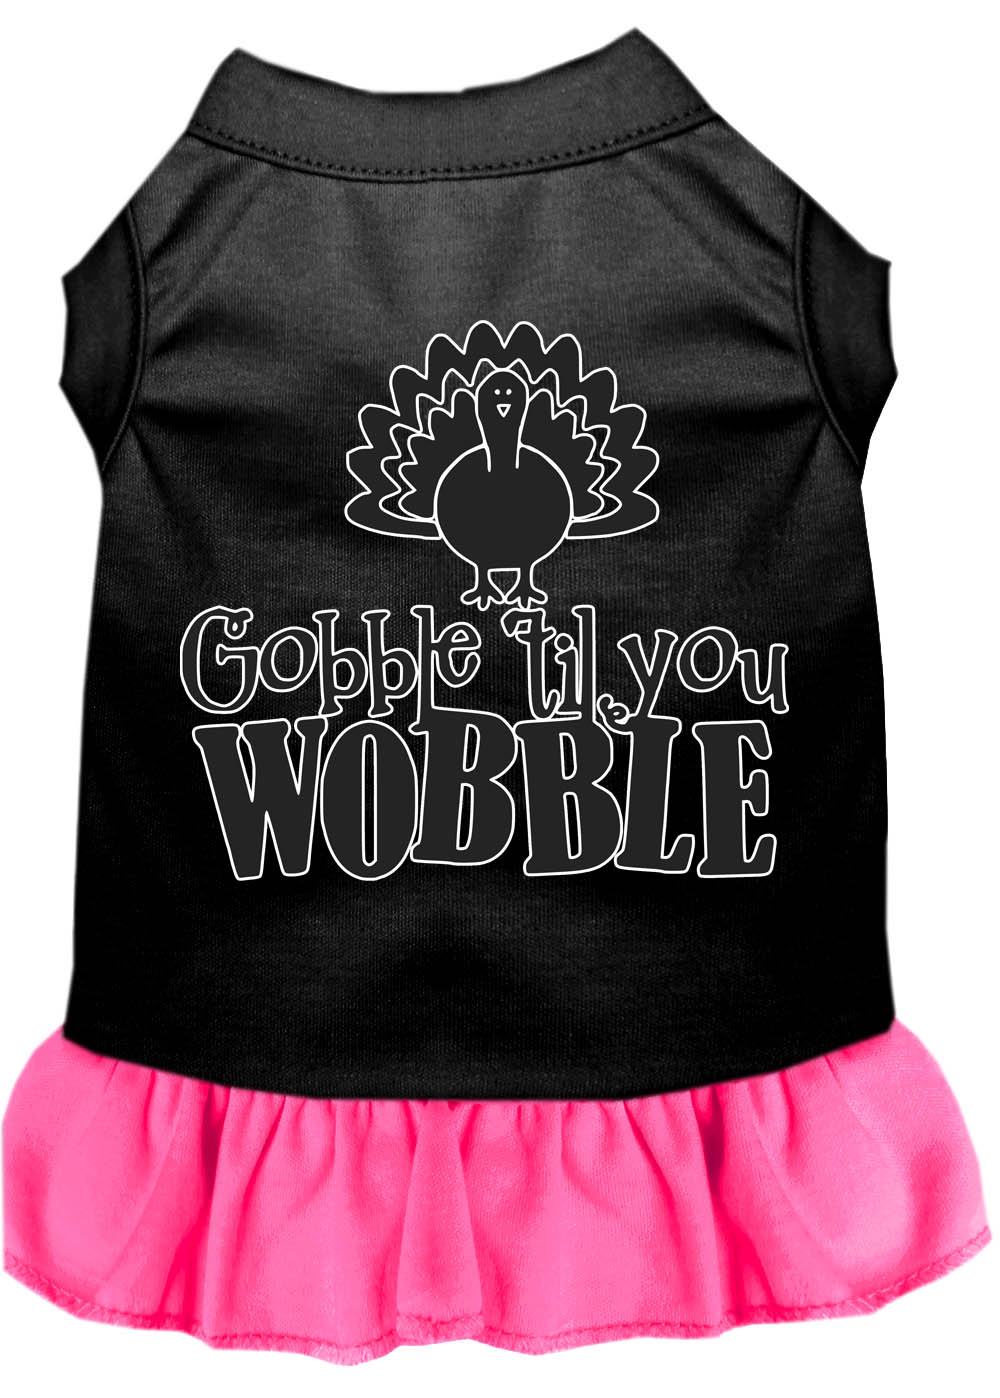 Gobble til You Wobble Screen Print Dog Dress Black with Bright Pink XS